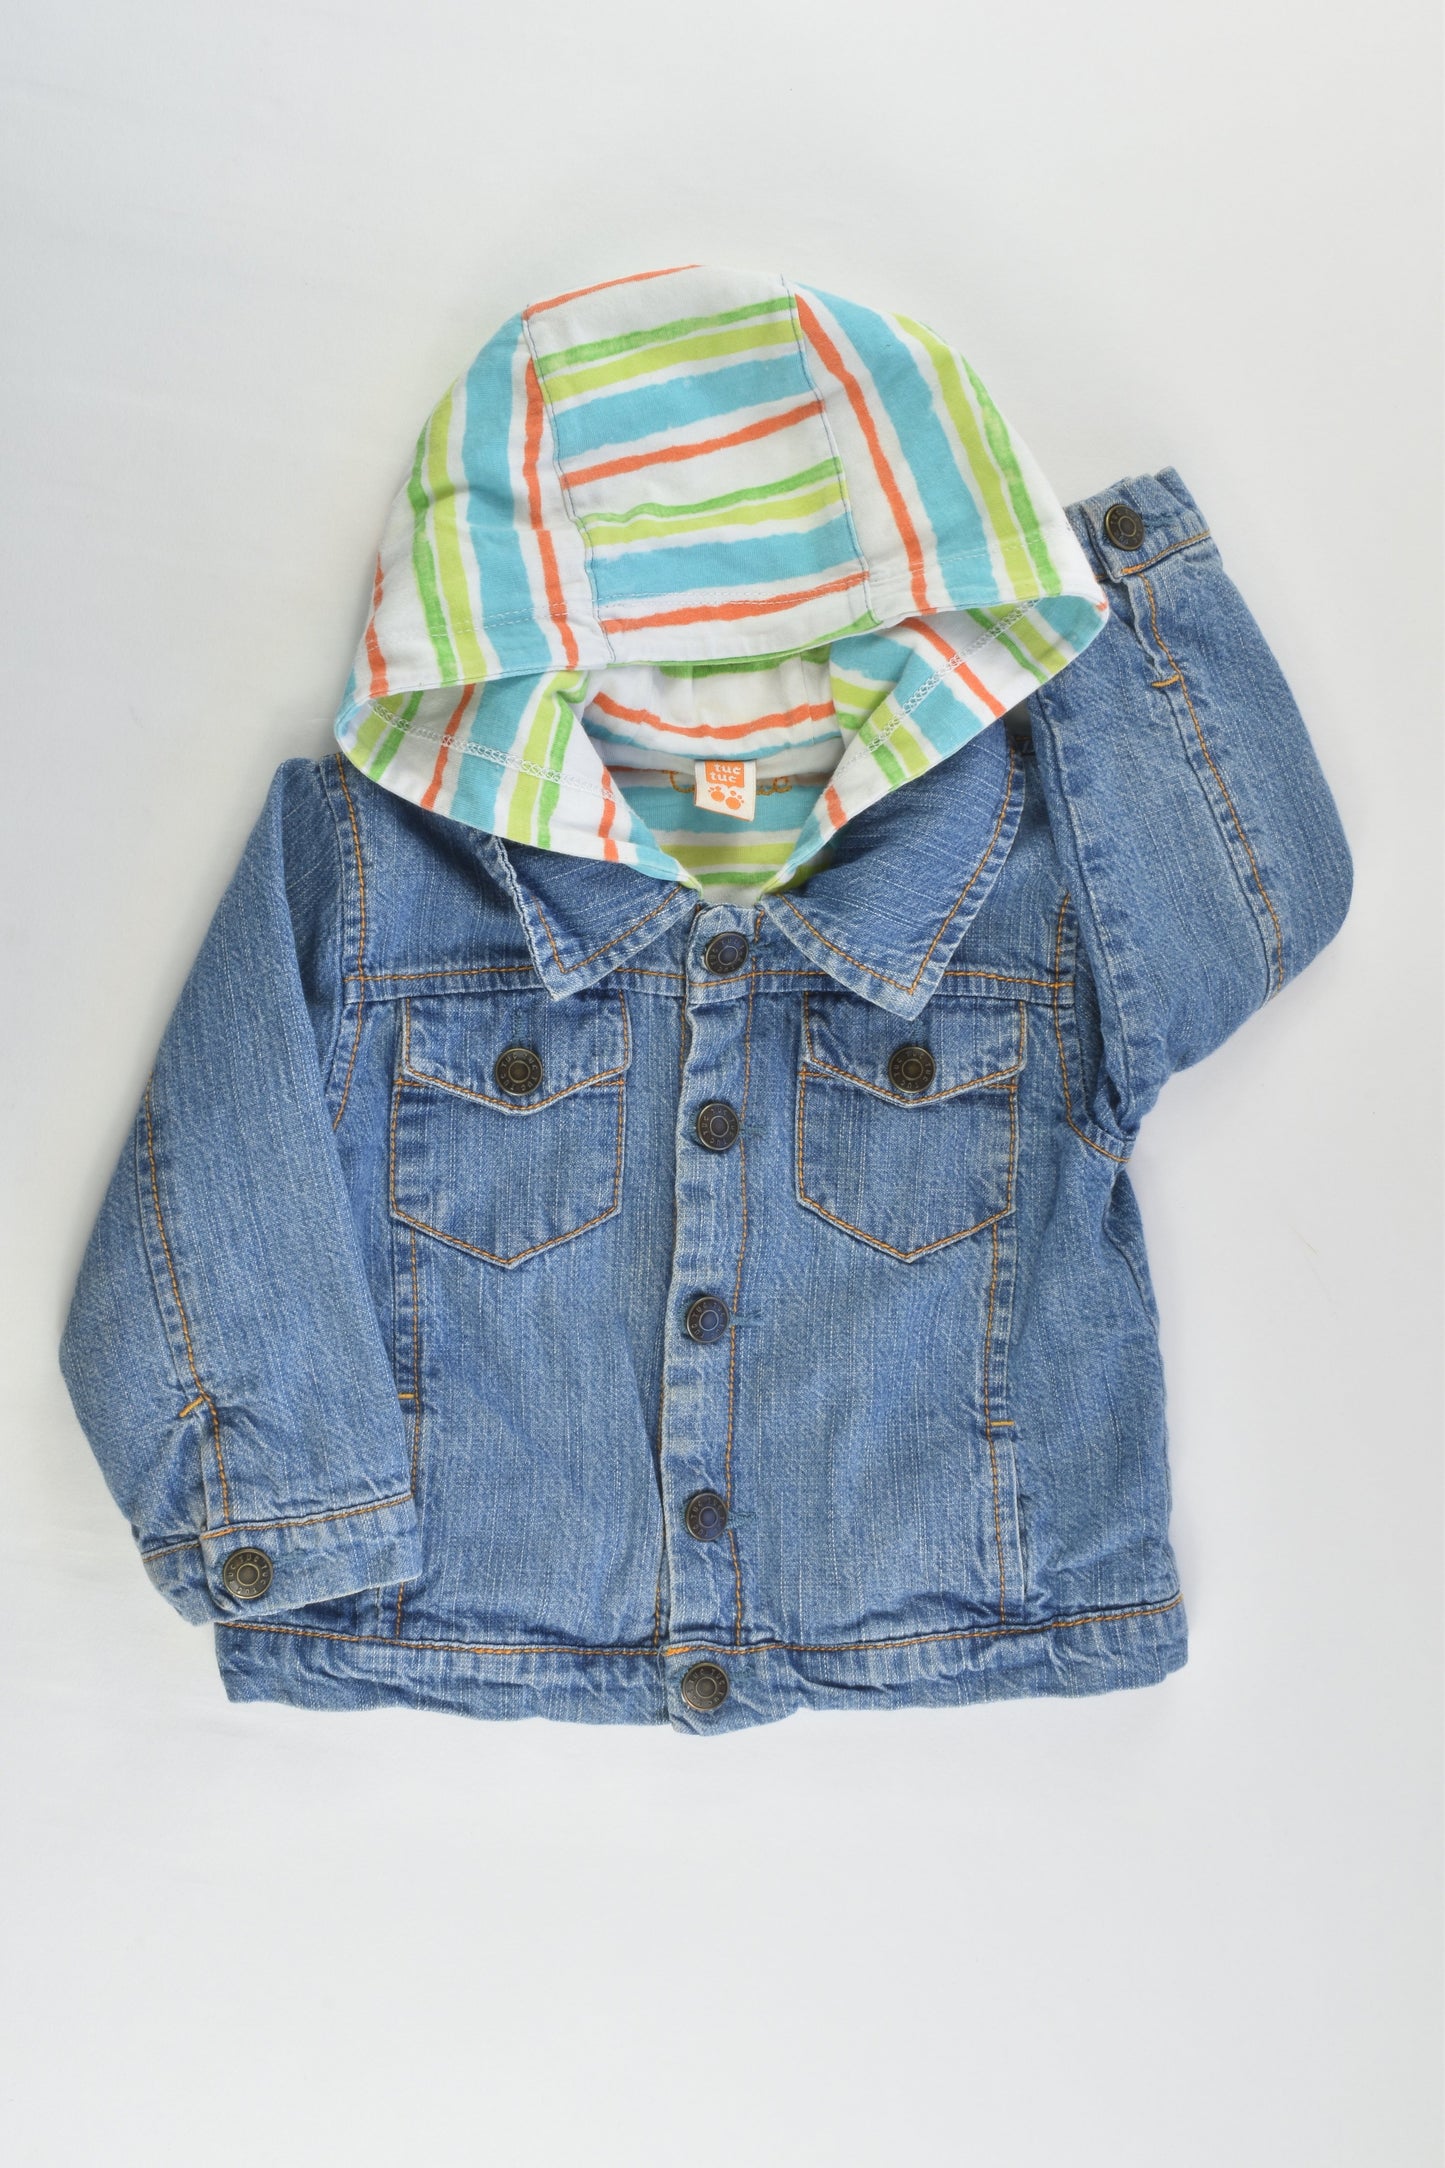 Tuc Tuc Size 0 (9 months, 71 cm) Lined Hooded Denim Jacket